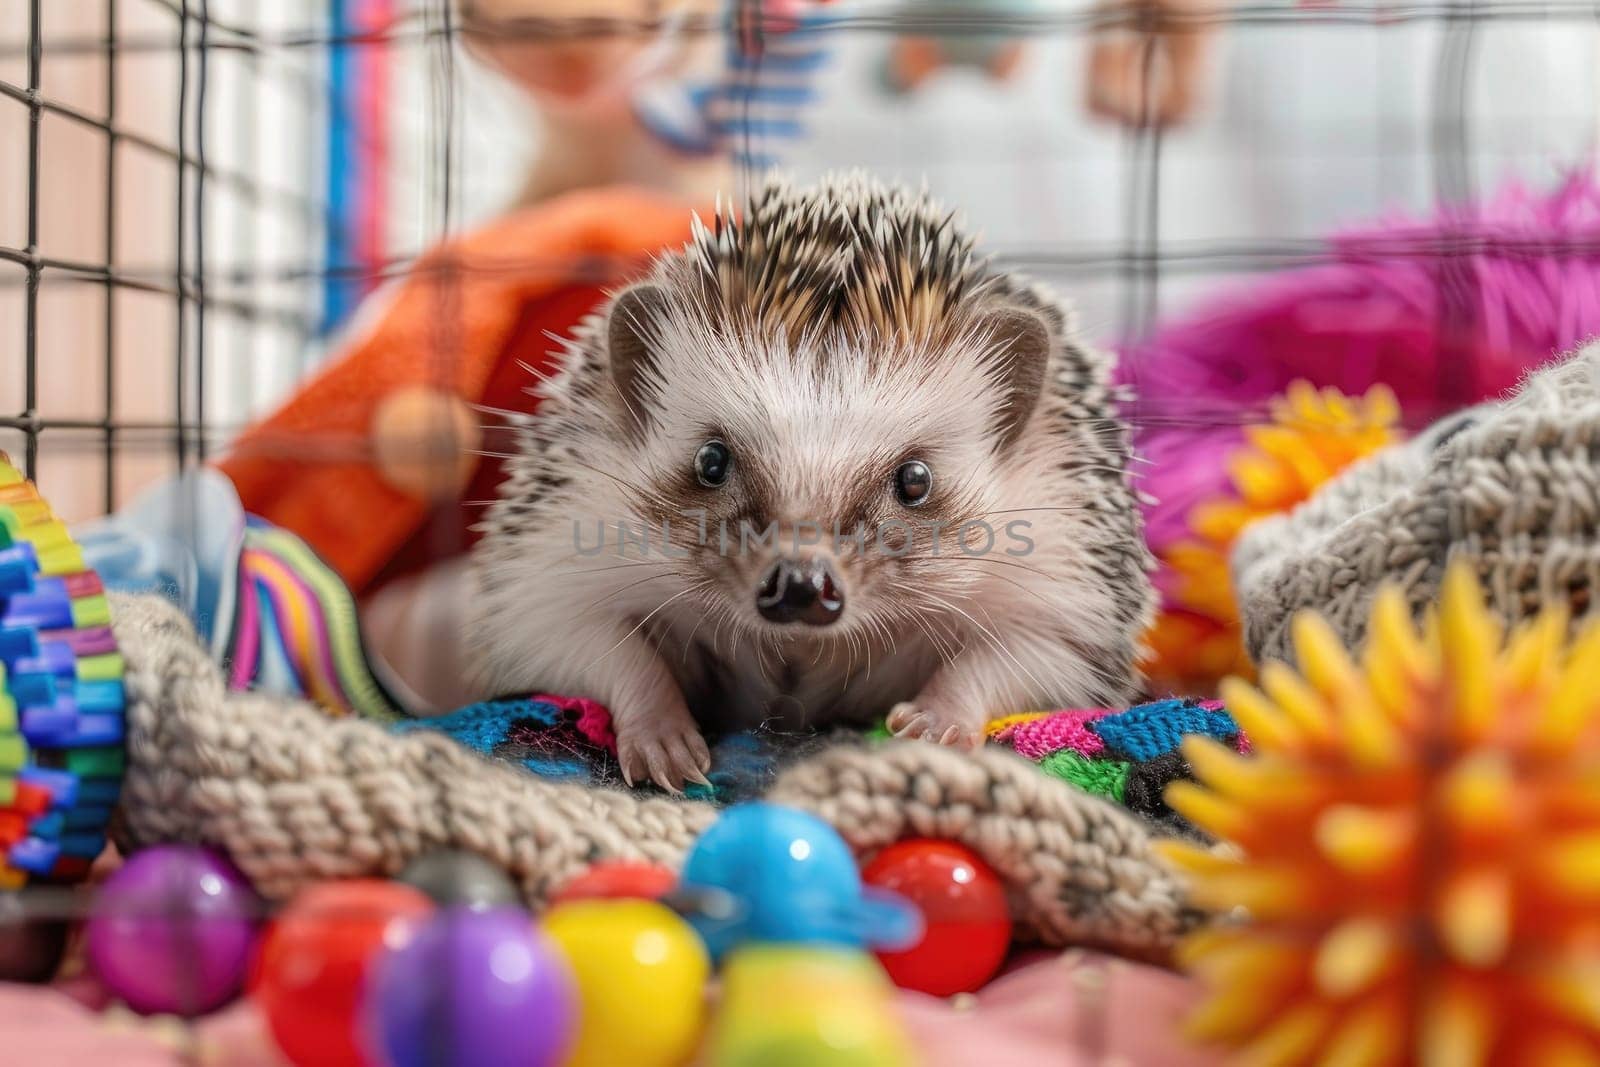 A happy hedgehog uncurled and exploring its playpen, filled with colorful toys and. by Chawagen